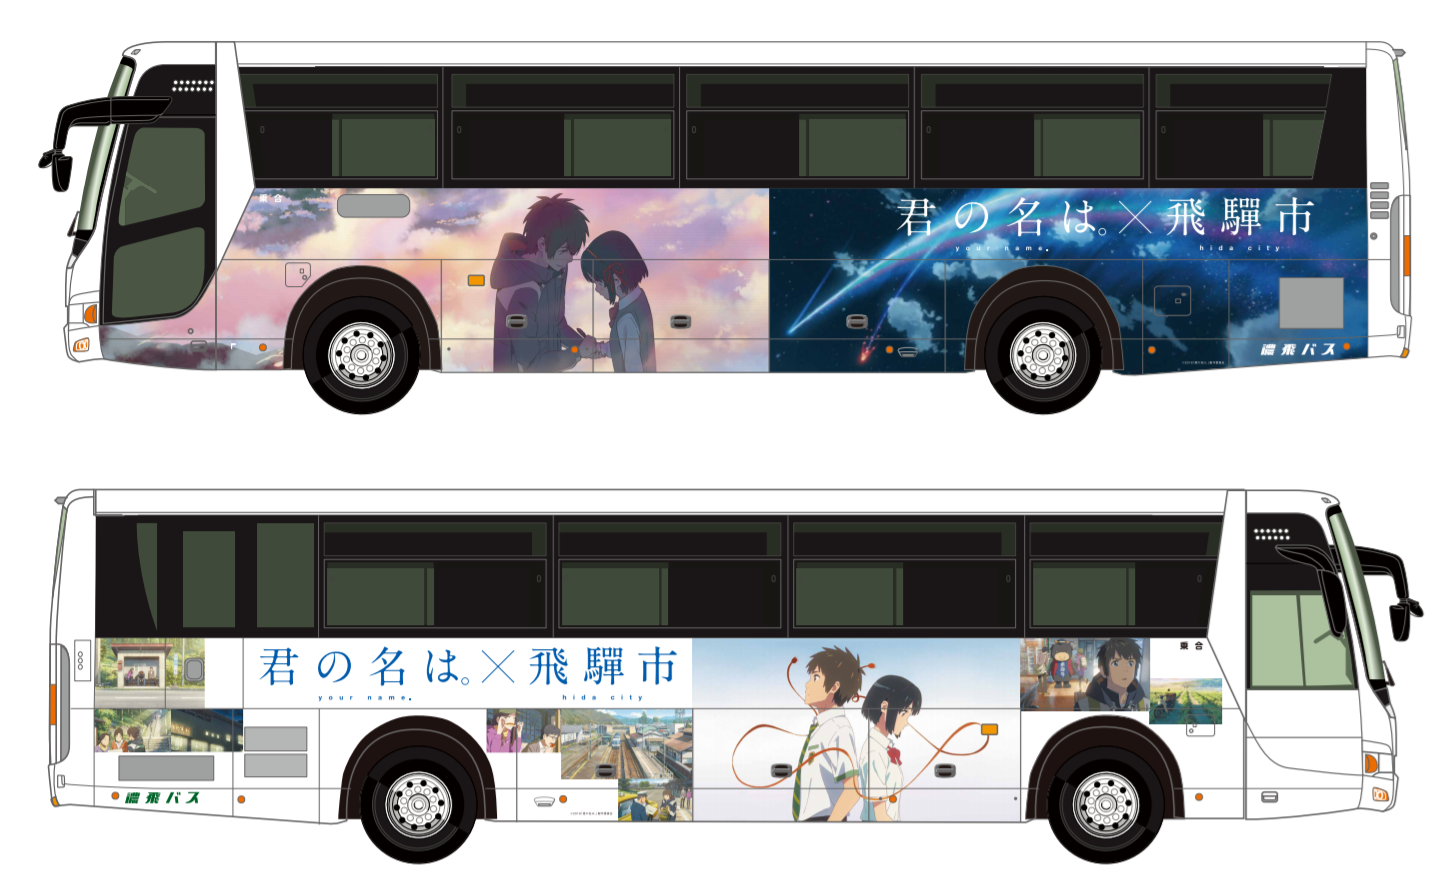 All Aboard the Anime Bus! We're Visiting an Anime Holy Land | J-List Blog